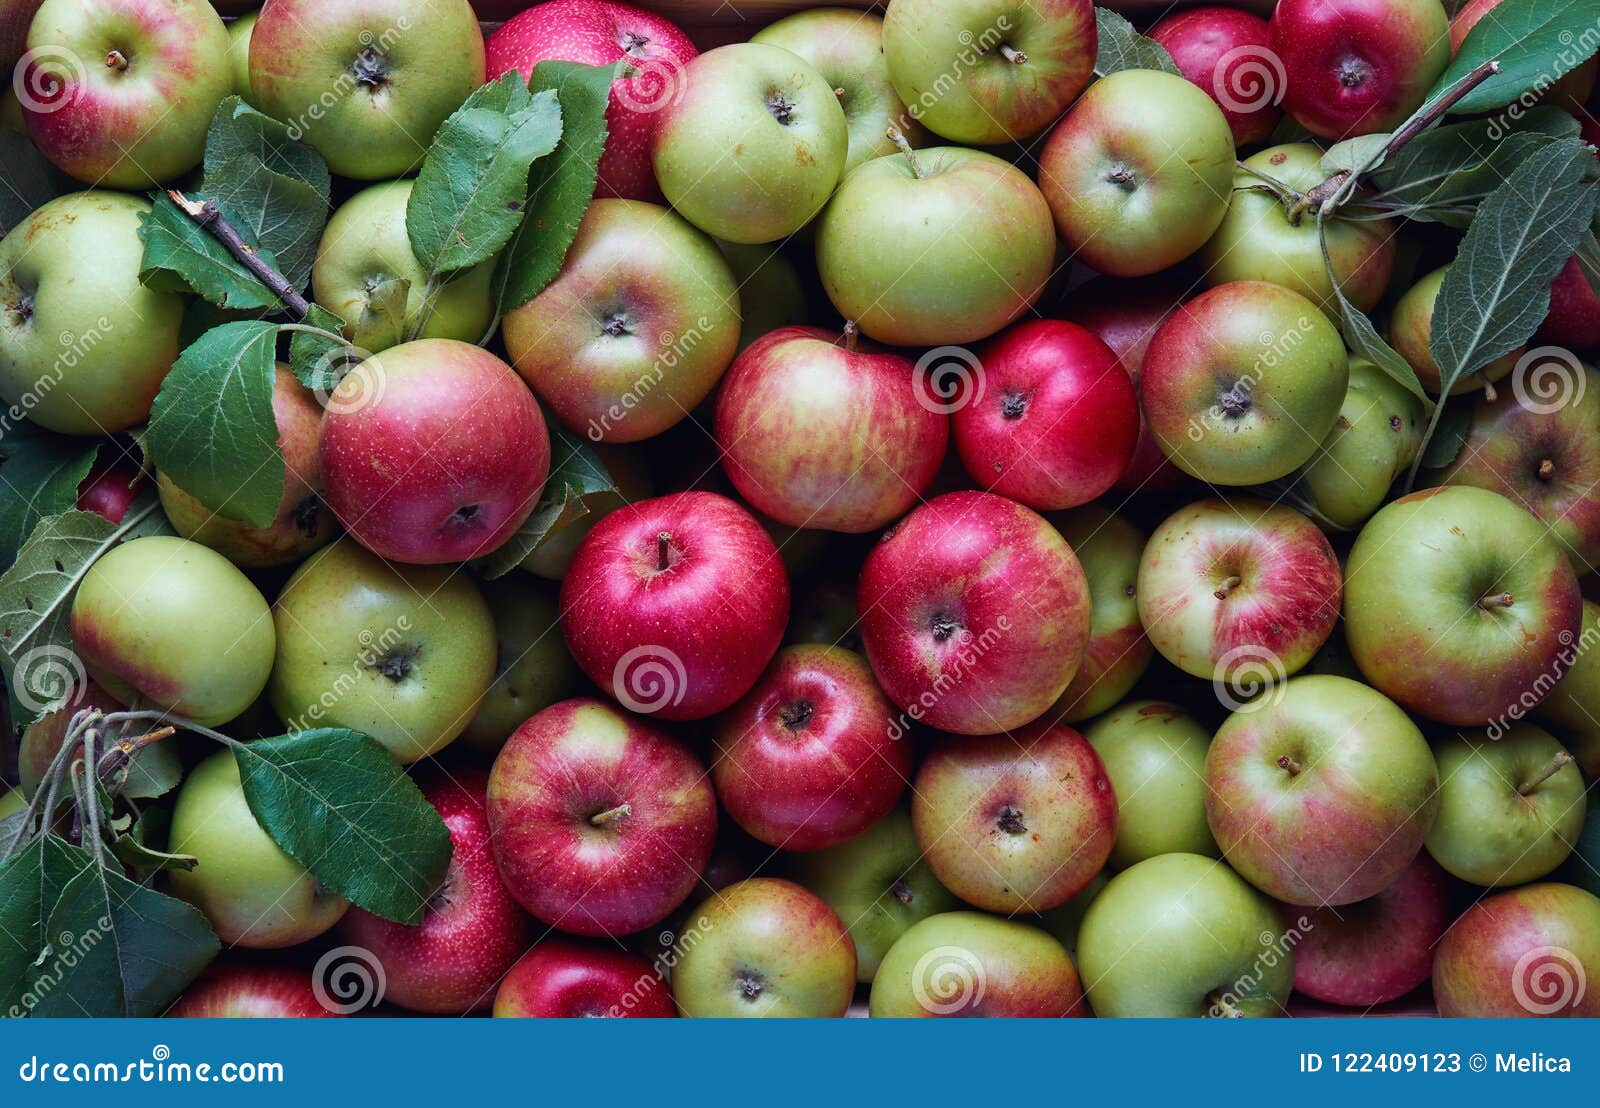 lots of apples in a crate